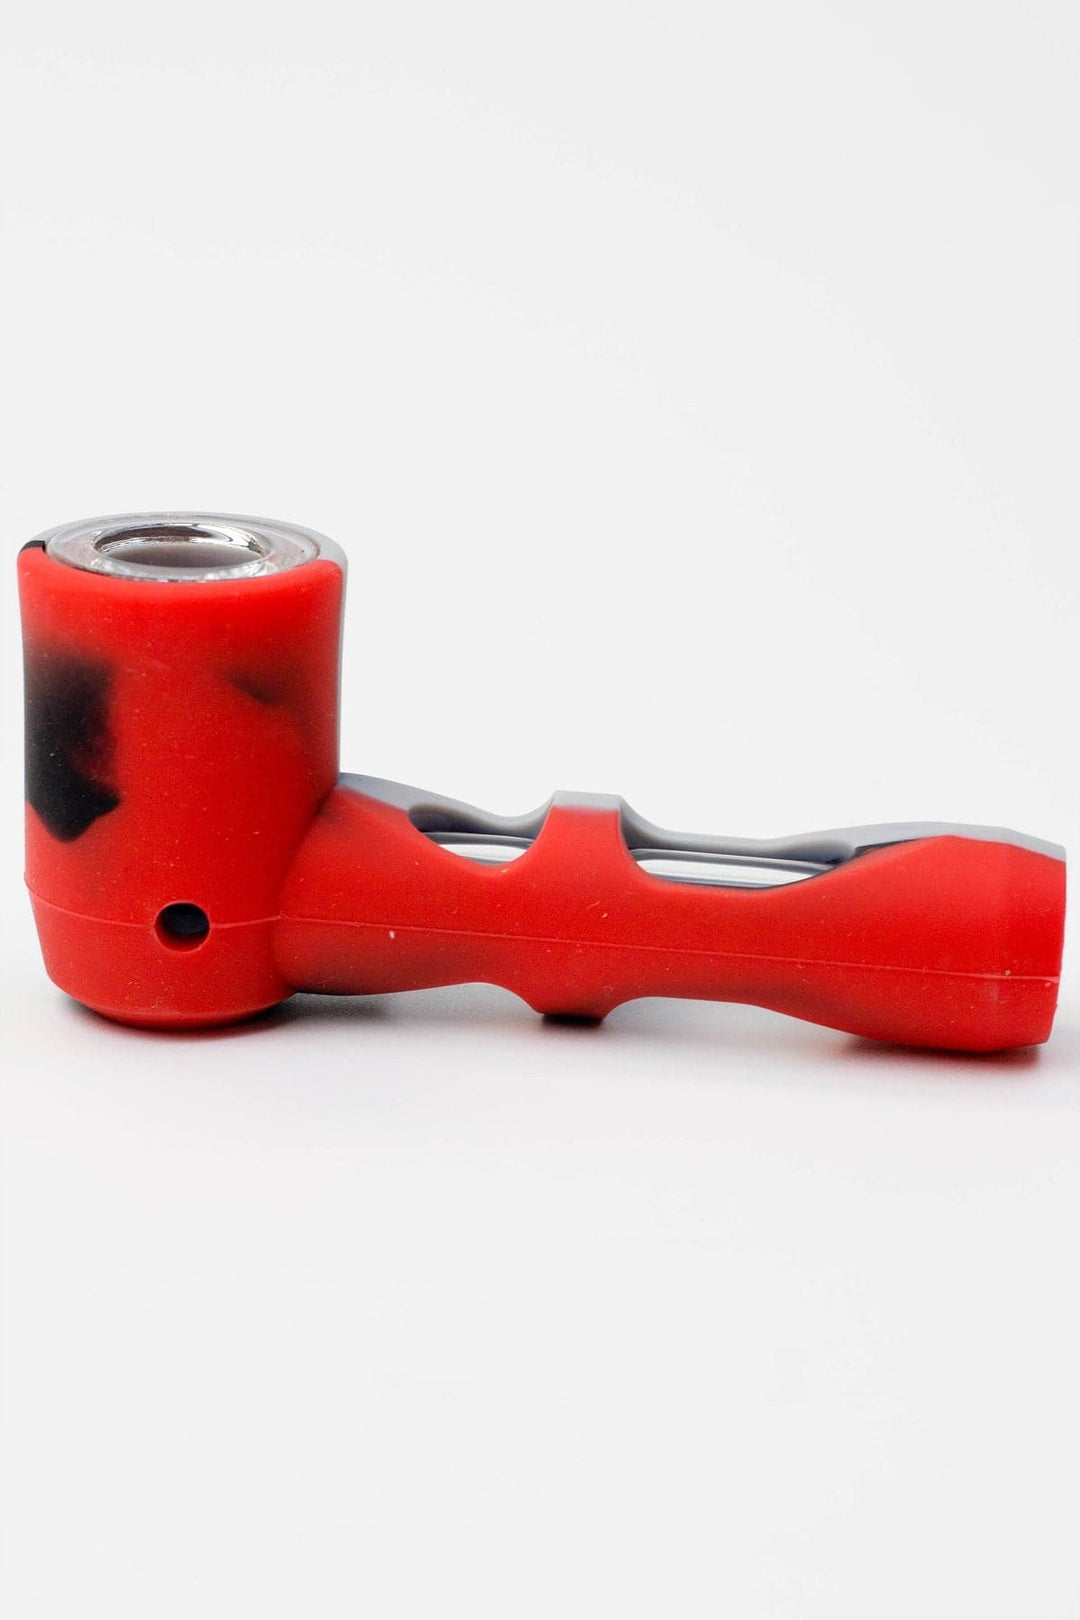 Multi colored silicone hand pipe with glass bowl and tube_8